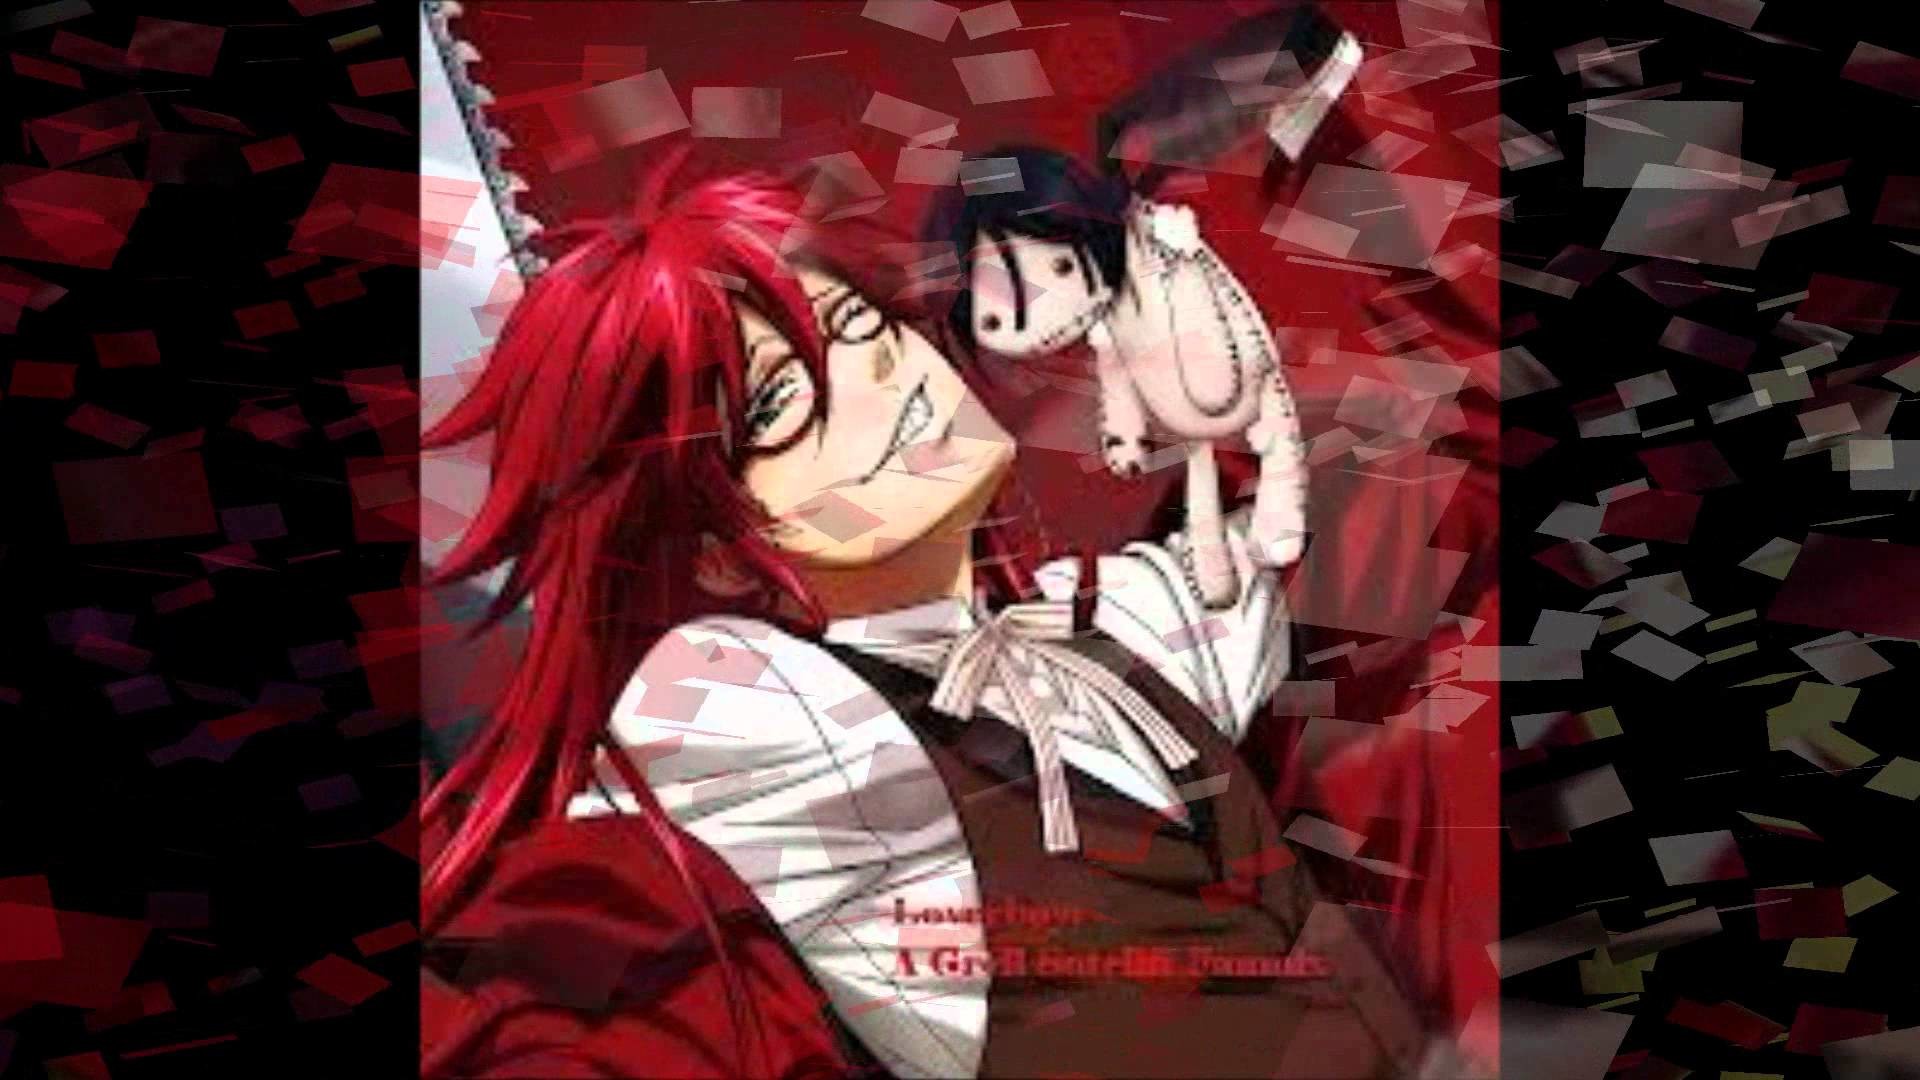 1920x1080 Don't Fear the Reaper ~ A Tribute to Grell Sutcliff